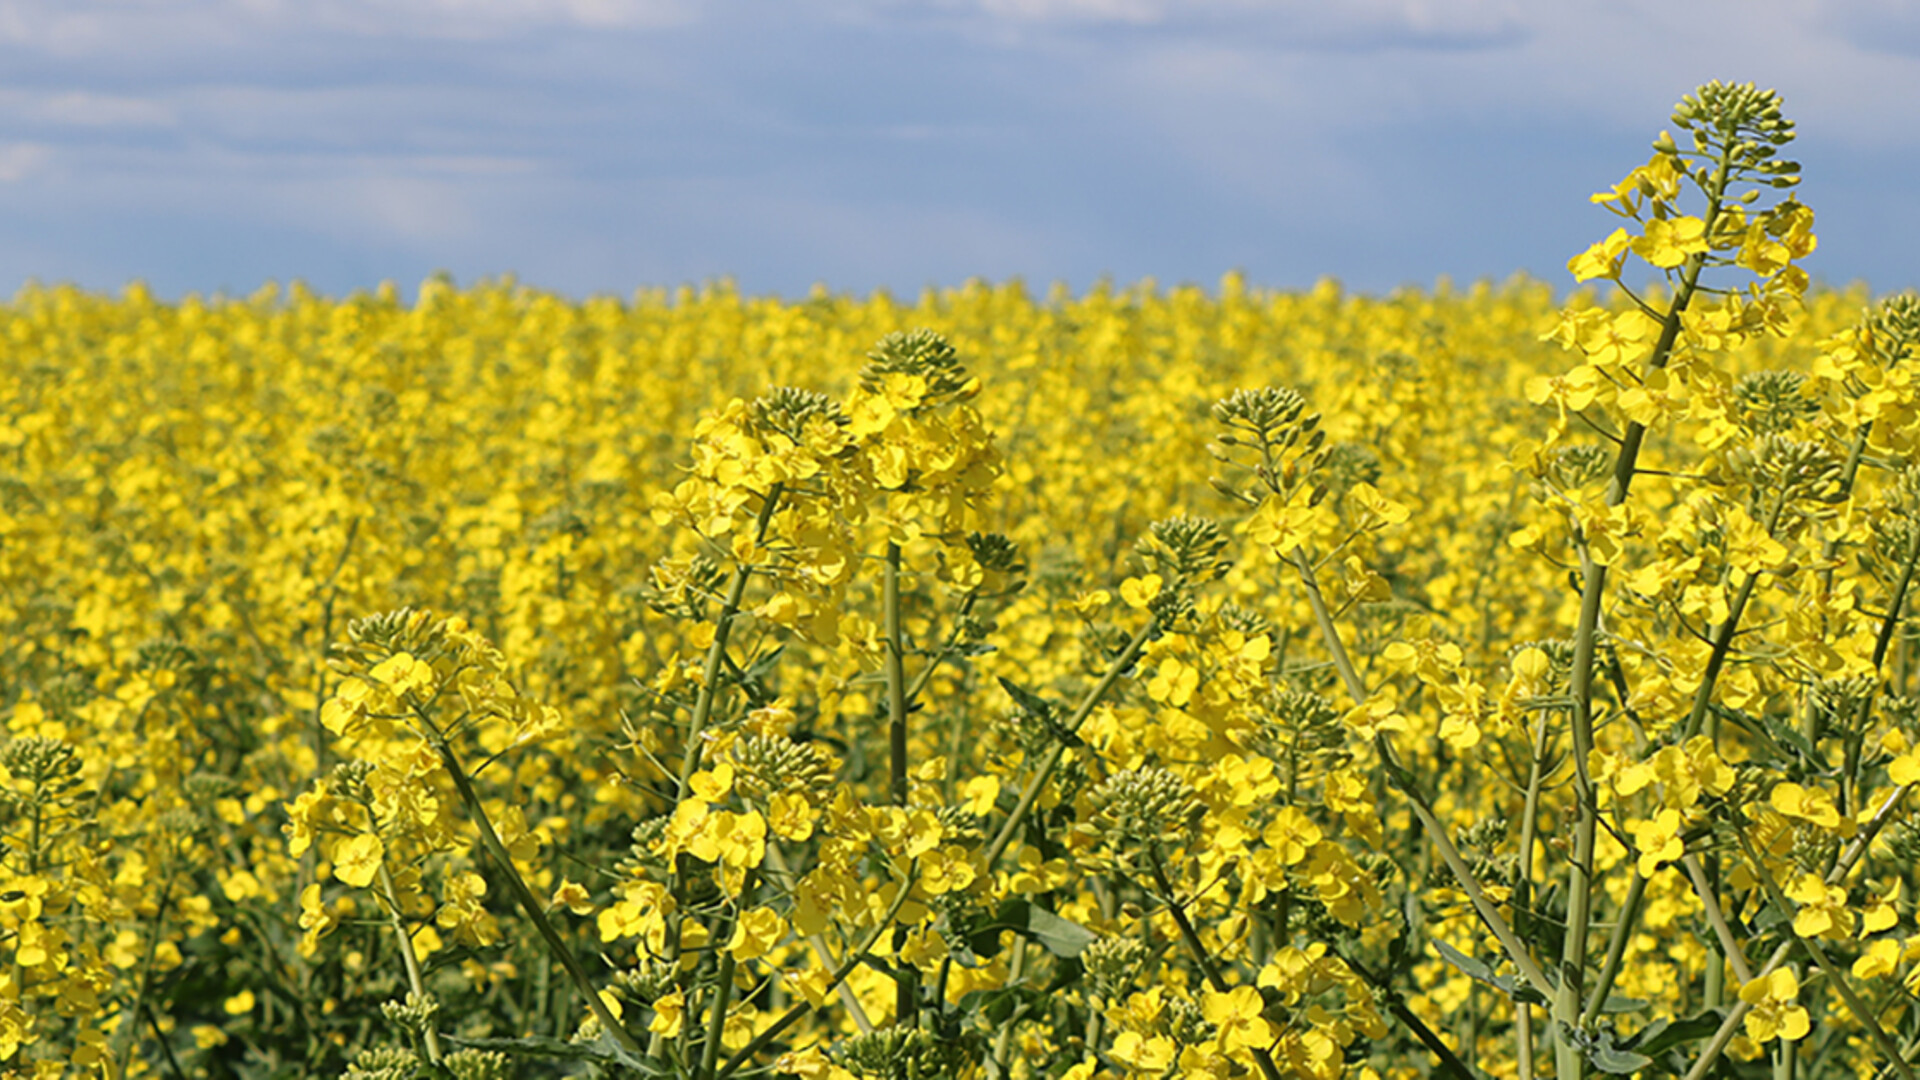 National Farmers Union Pleased EPA Included Renewable Diesel Pathway for Canola in Regulatory Agenda